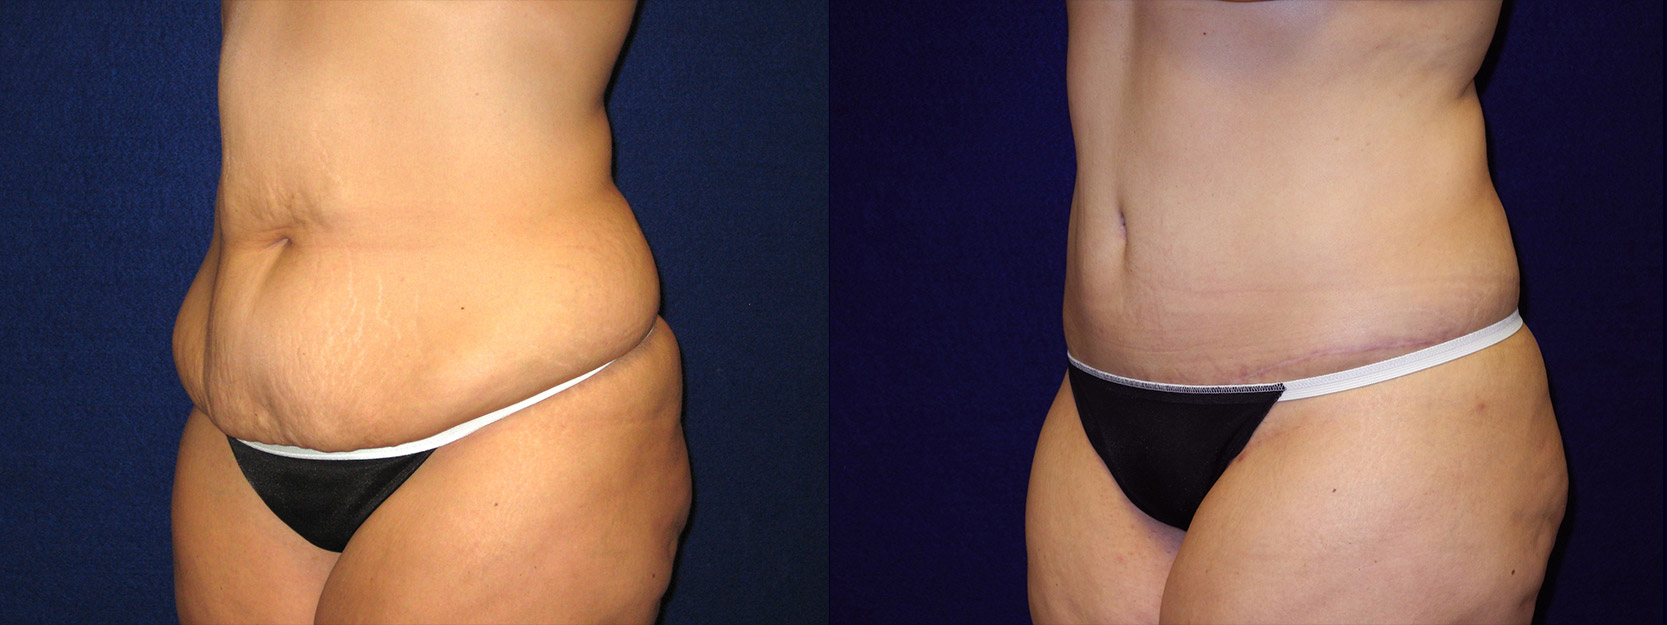 Left 3/4 View - Abdominoplasty After Massive Weight Loss